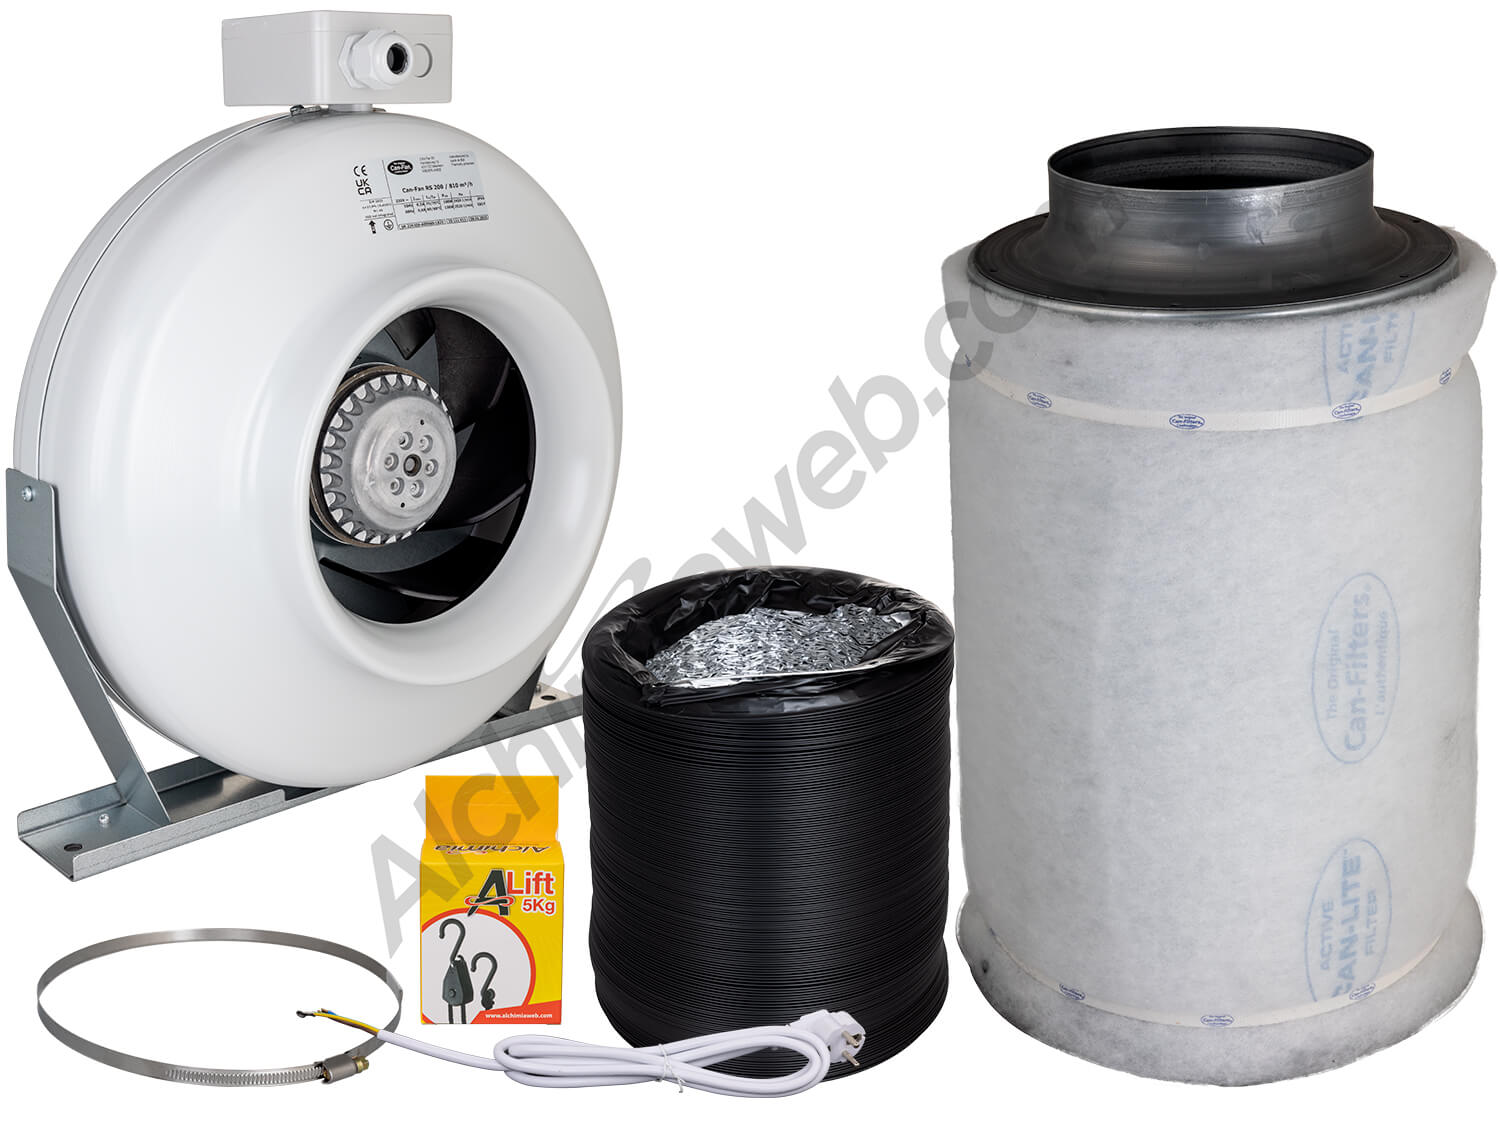 Alchimia Can-Fan RS 200/810m3/h air extraction kit